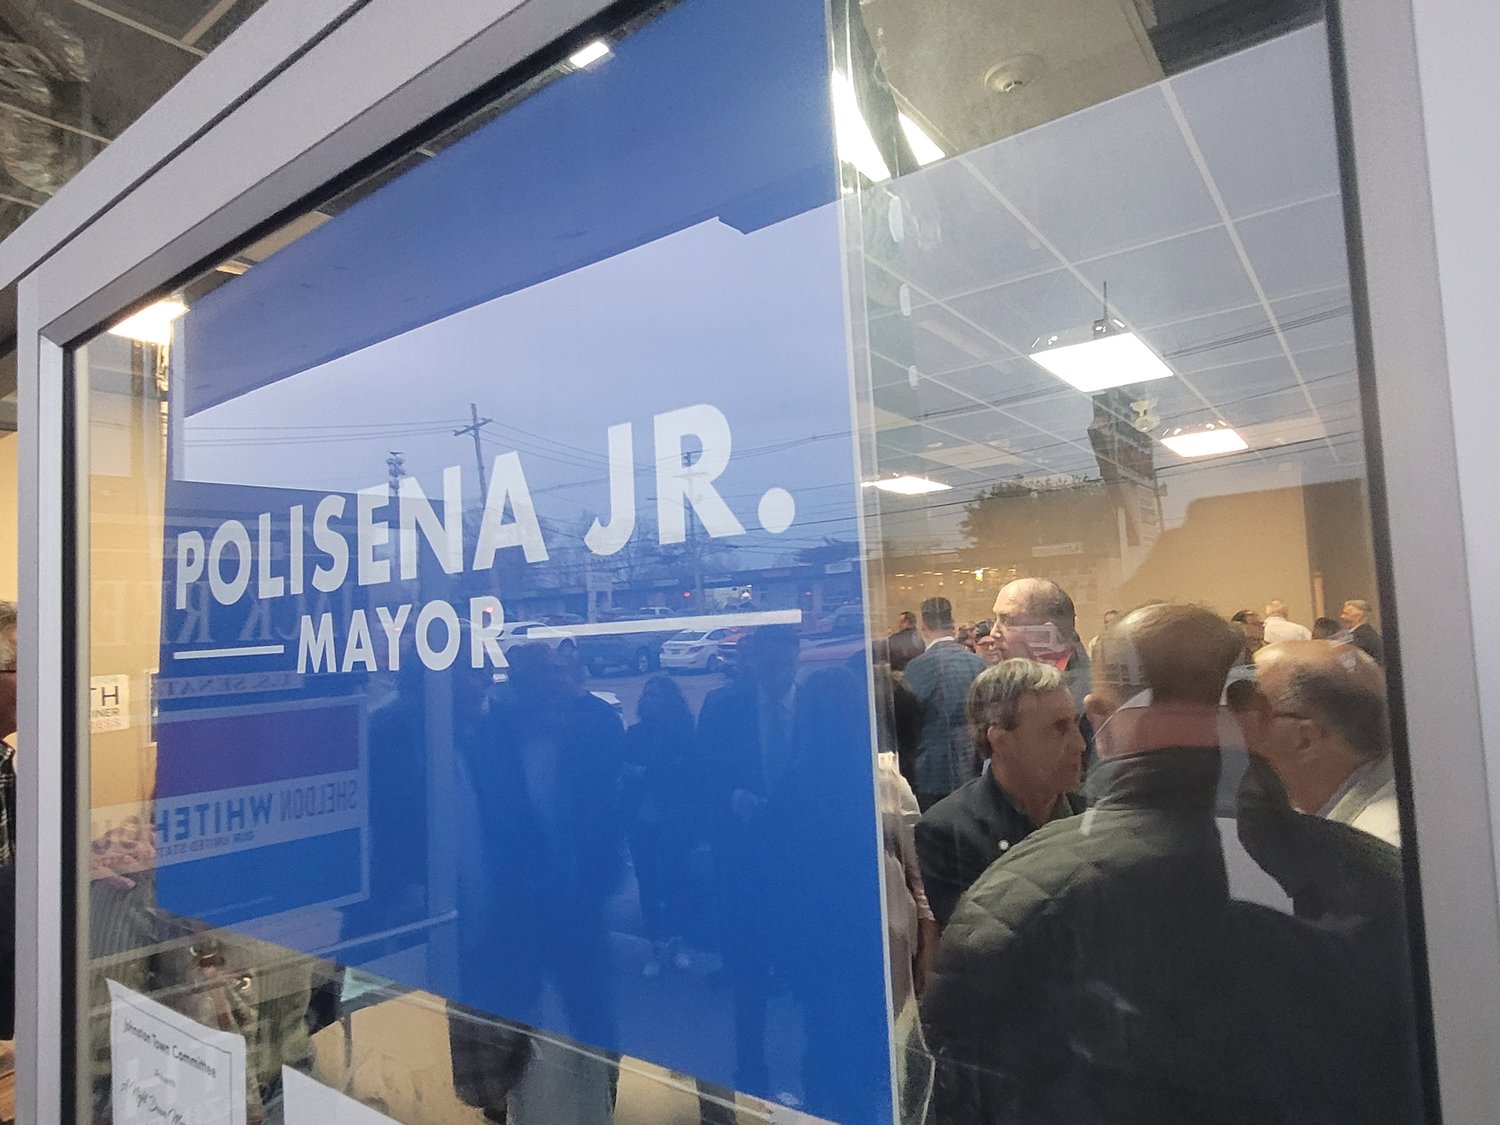 BIG CROWD: Johnston Mayor Joseph M. Polisena introduced his son to an overflow crowd in an empty storefront in Town Hall Plaza. Joe Polisena Jr. announced his candidacy for mayor, in front of friends, family, local politicians and key community representatives.